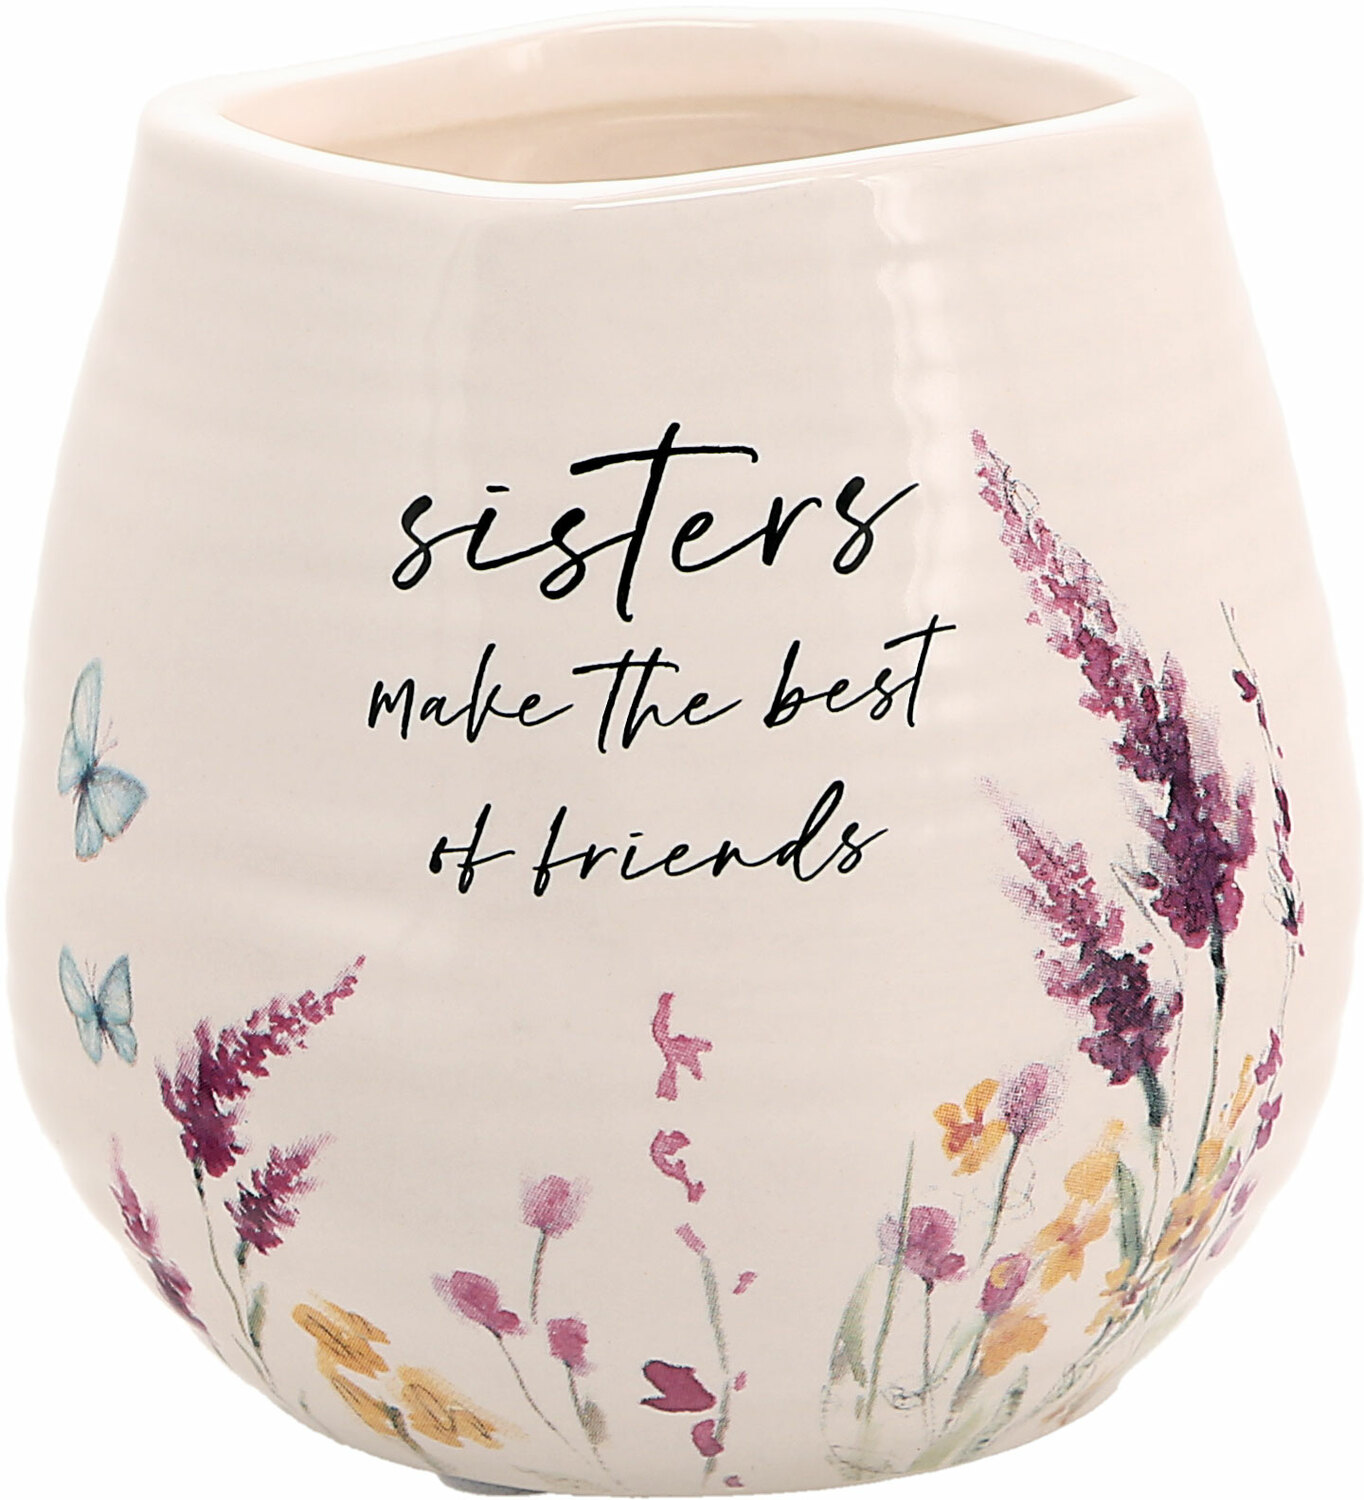 Sisters by Meadows of Joy - Sisters - 8 oz - 100% Soy Wax Candle
Scent: Tranquility